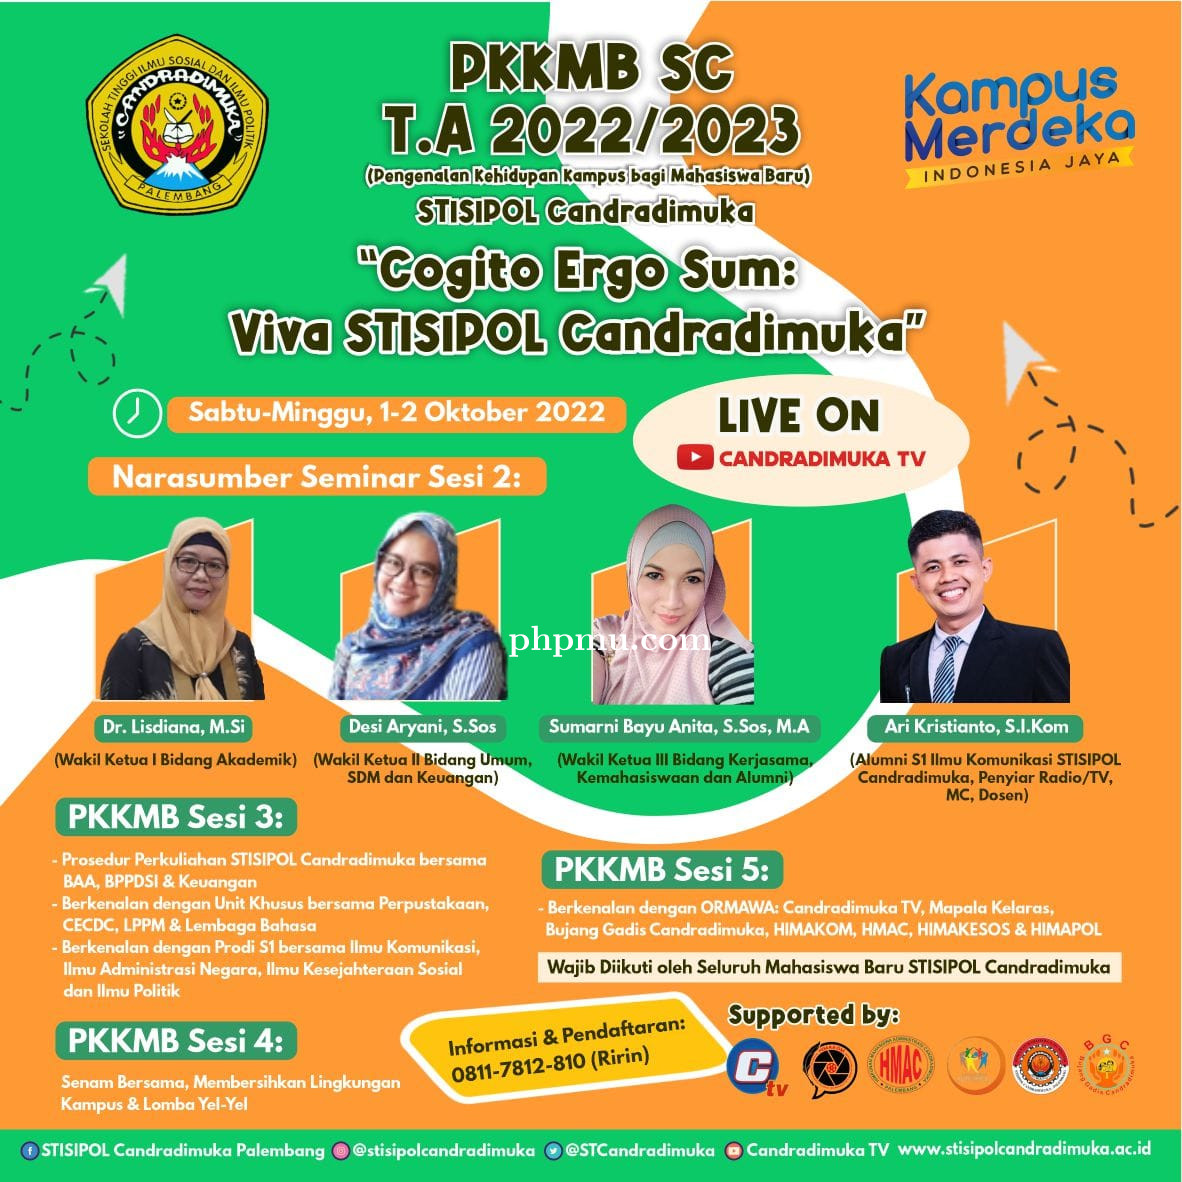 PKKMB STISIPOL Candradimuka T.A 2022/2023